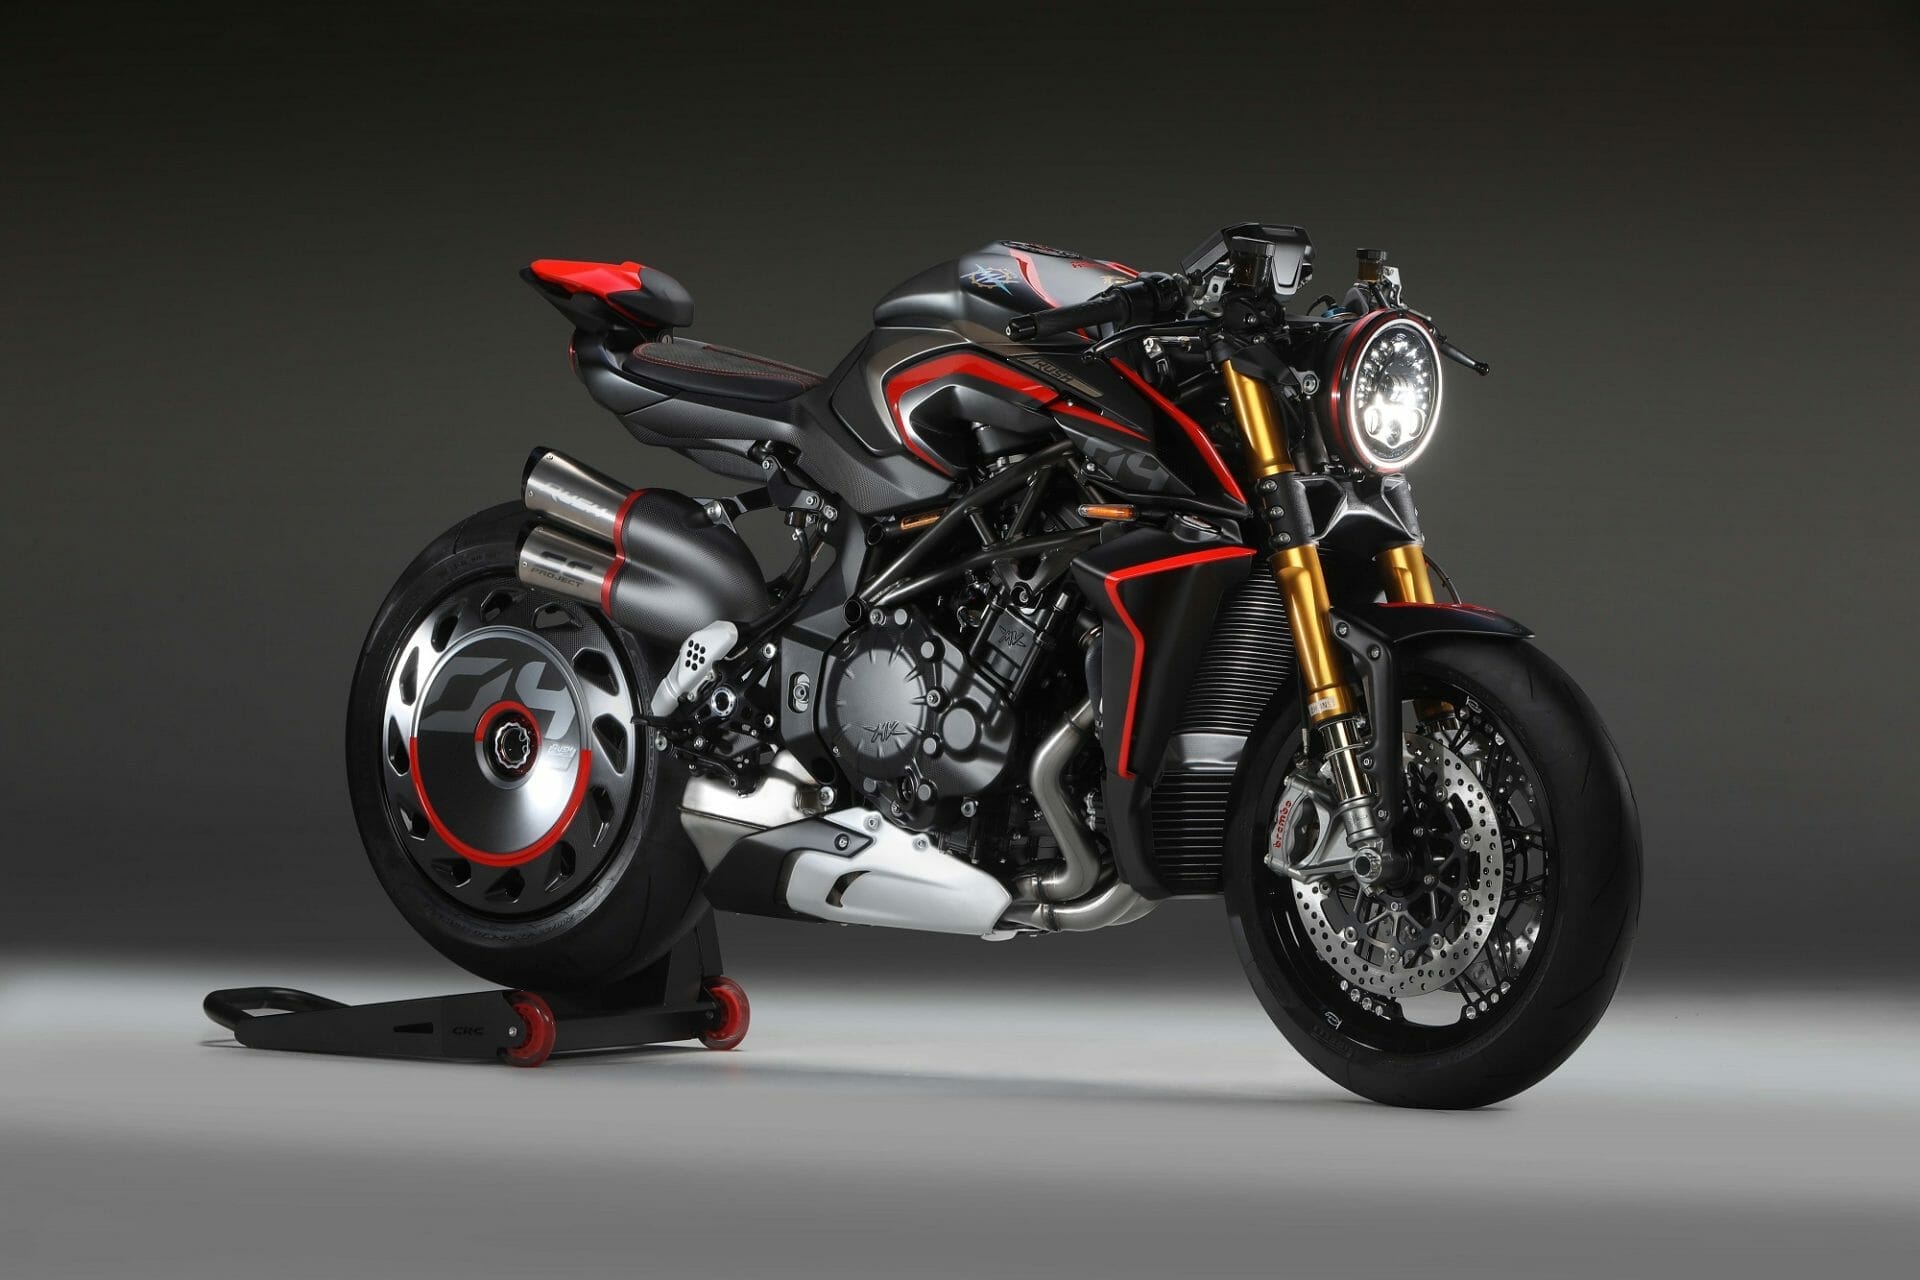 MV Agusta Rush 1000 gets more power
- also in the MOTORCYCLE NEWS APP